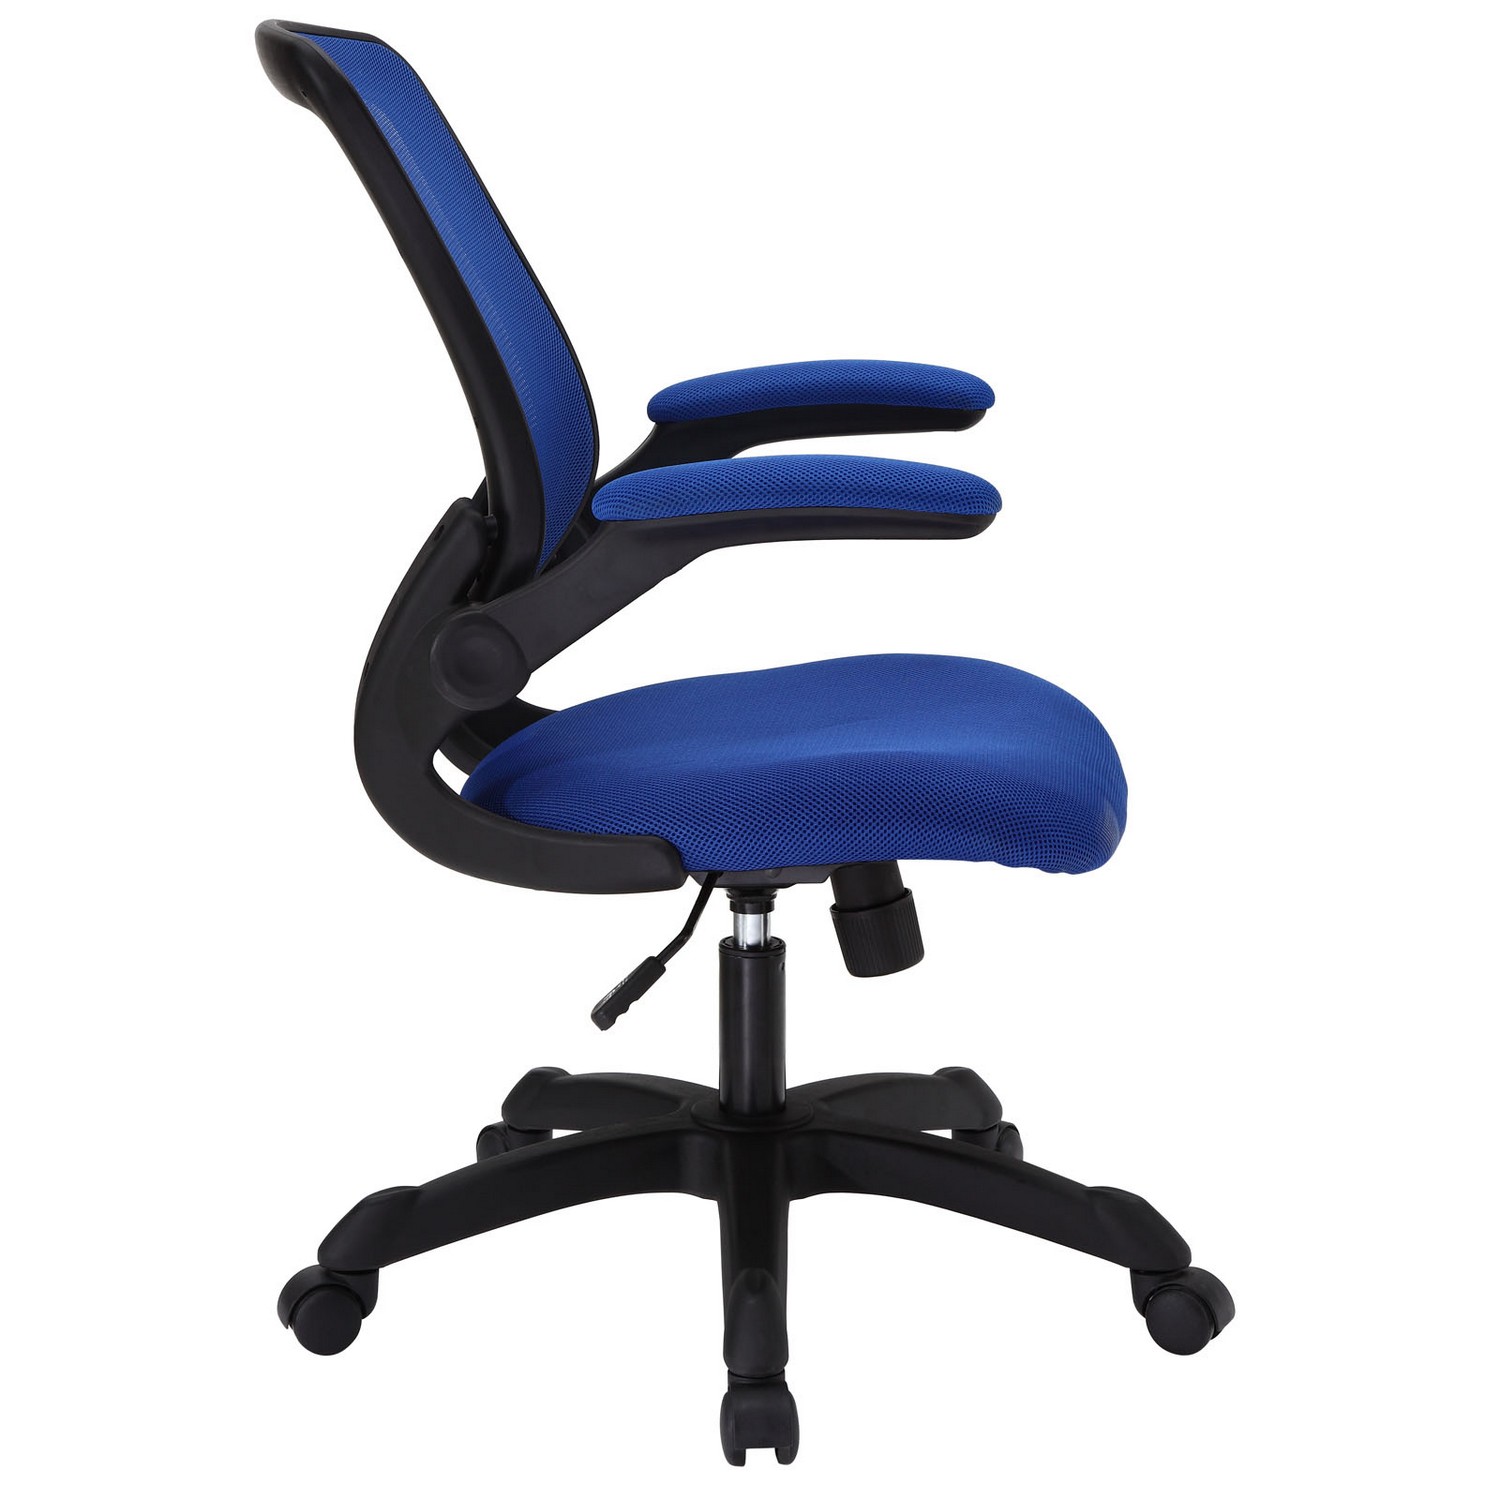 Modway Veer Mesh Office Chair - Blue